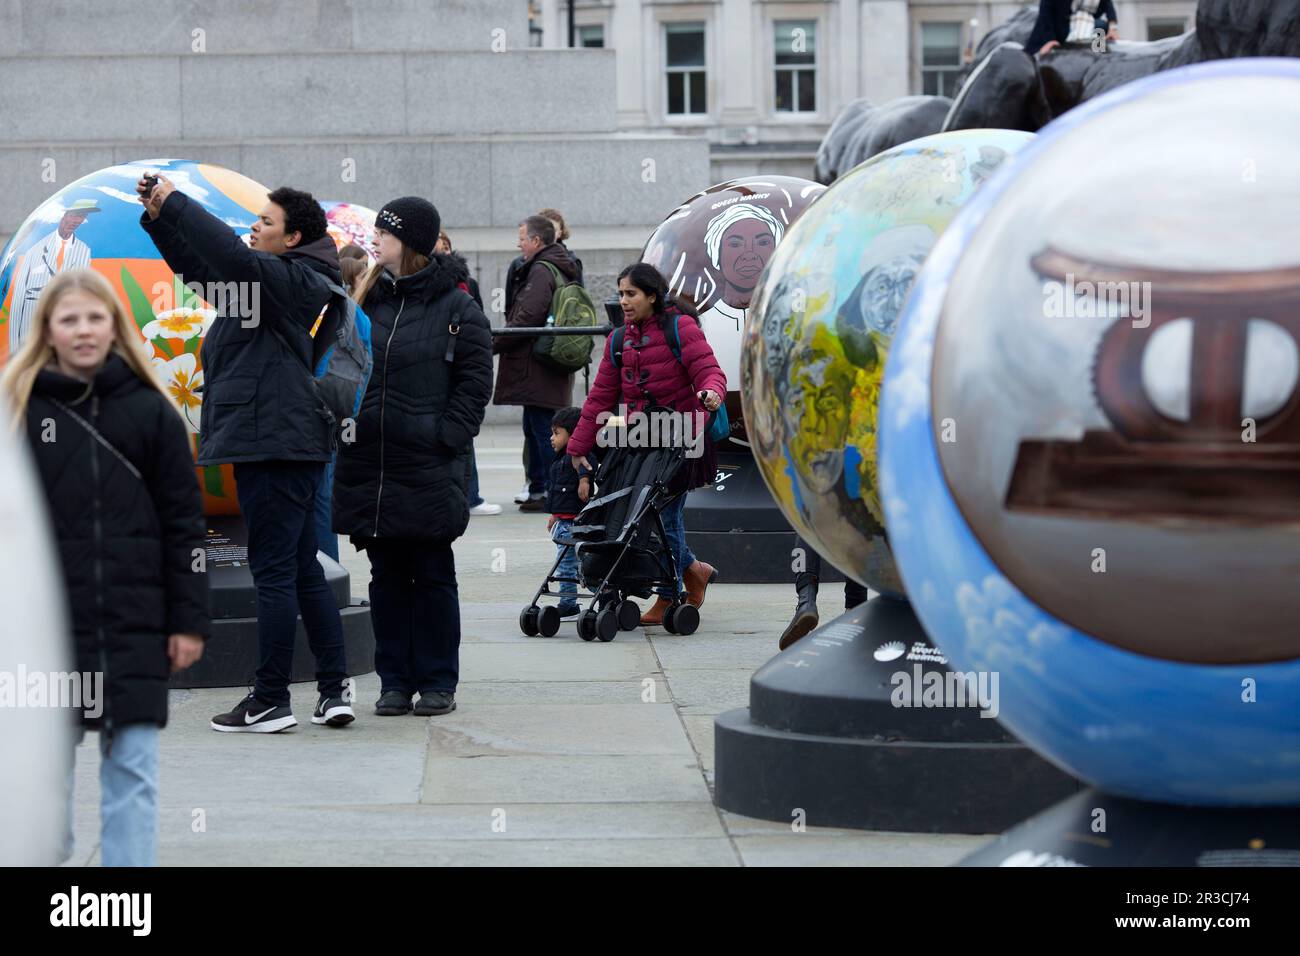 Globes made by artists.are seen as part of The World Reimagined installation for racial justice in Trafalgar Square, London. Stock Photo